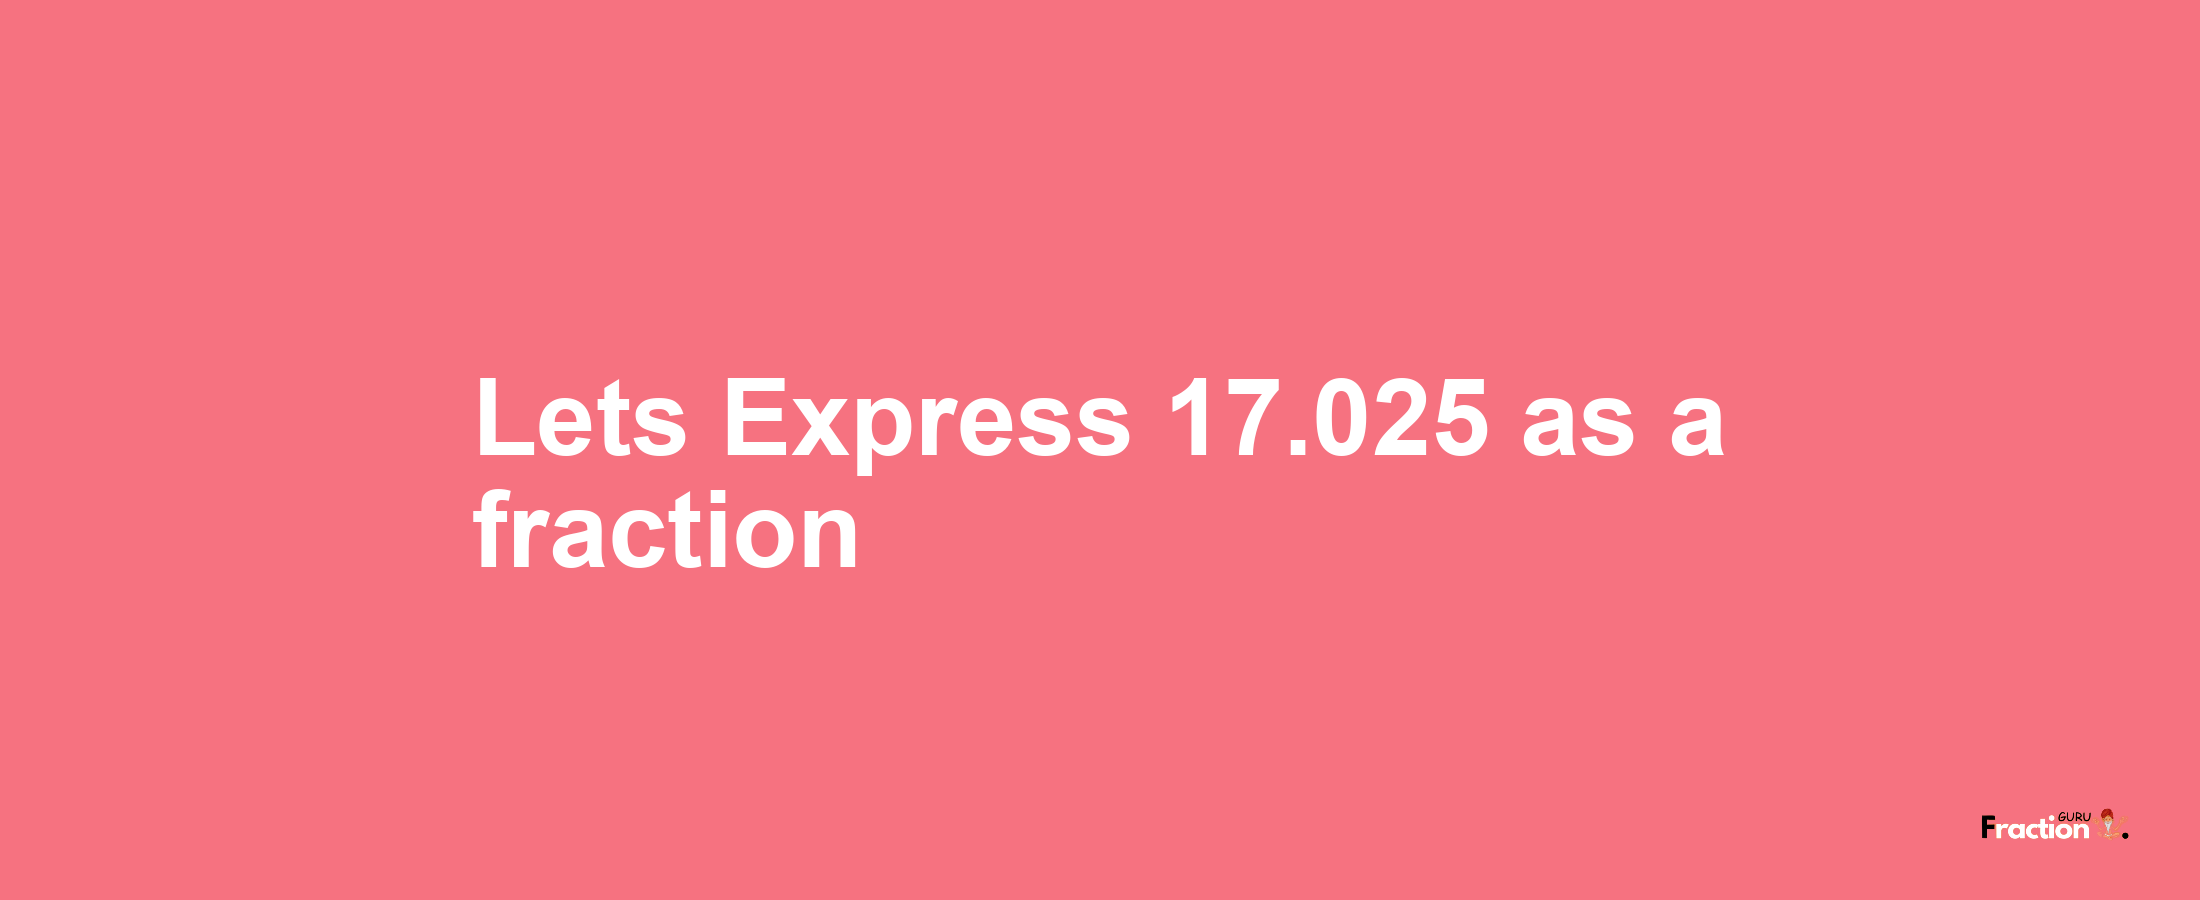 Lets Express 17.025 as afraction